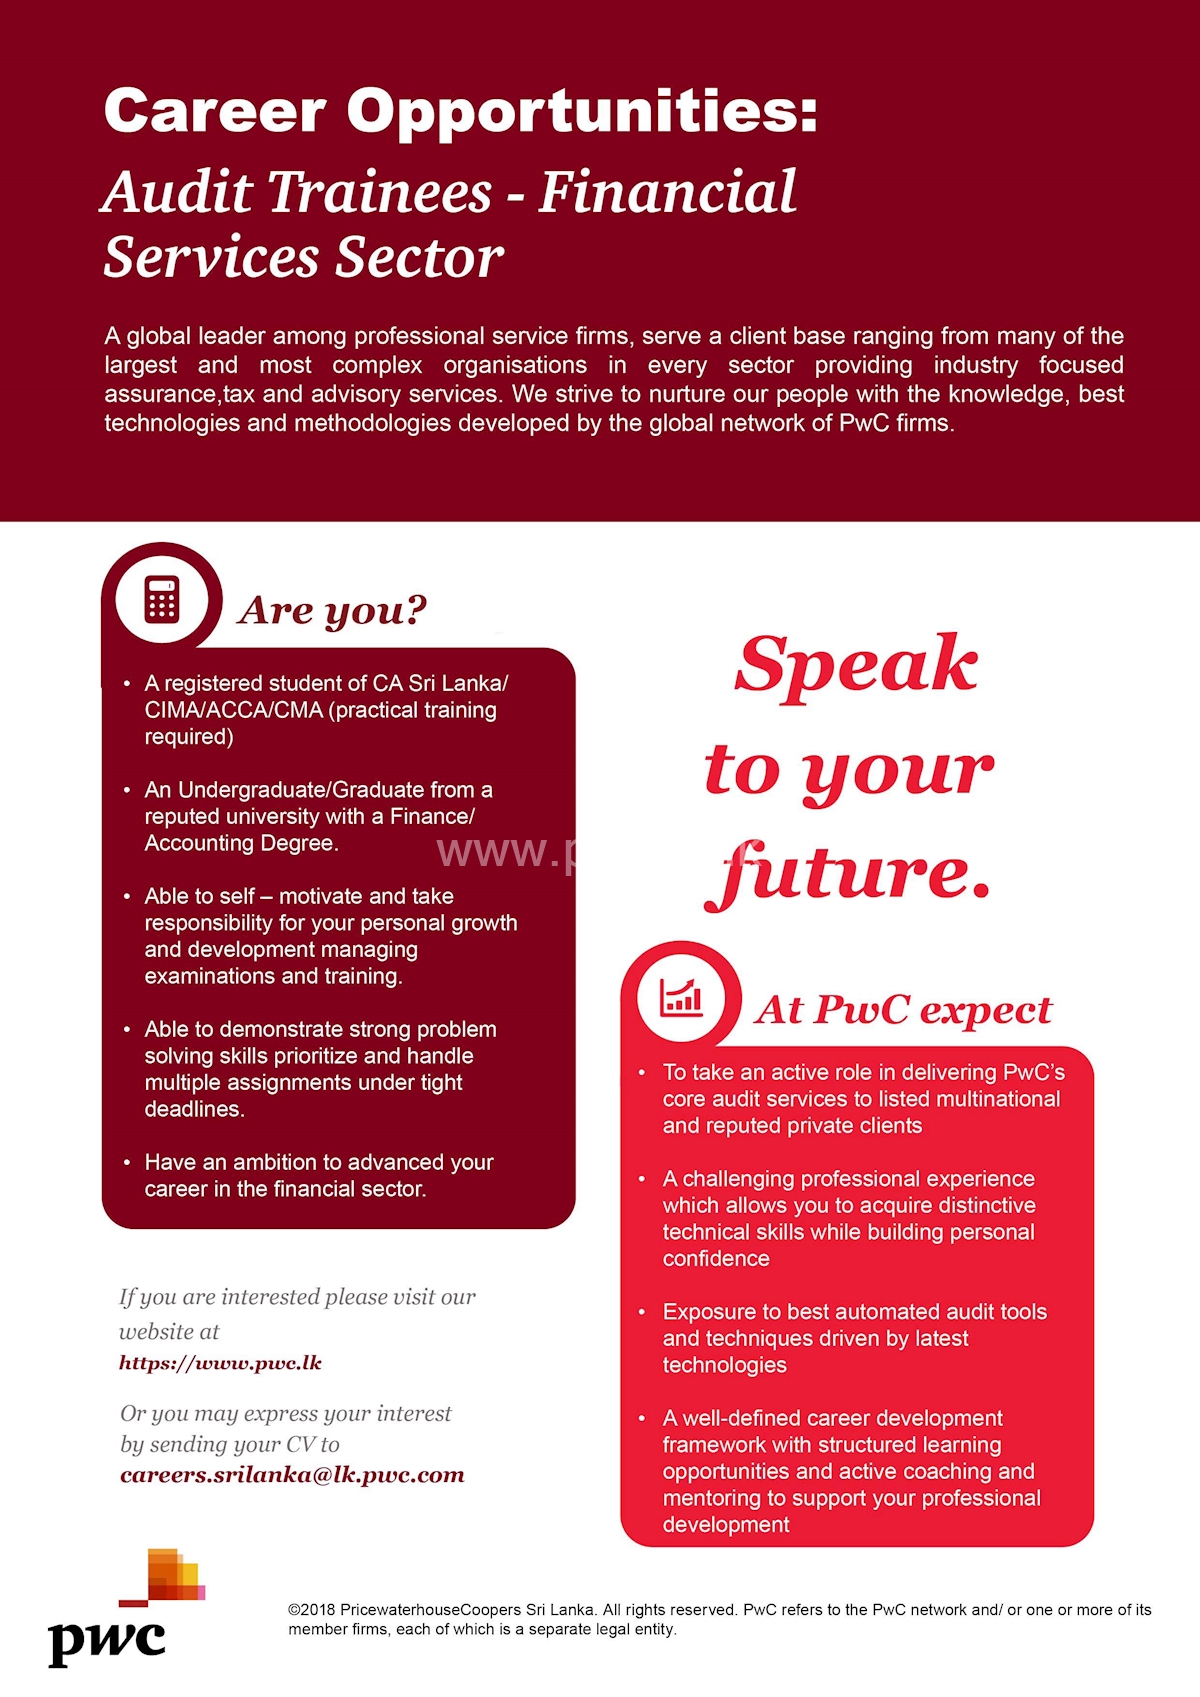 Audit Trainees - Financial Services Sector